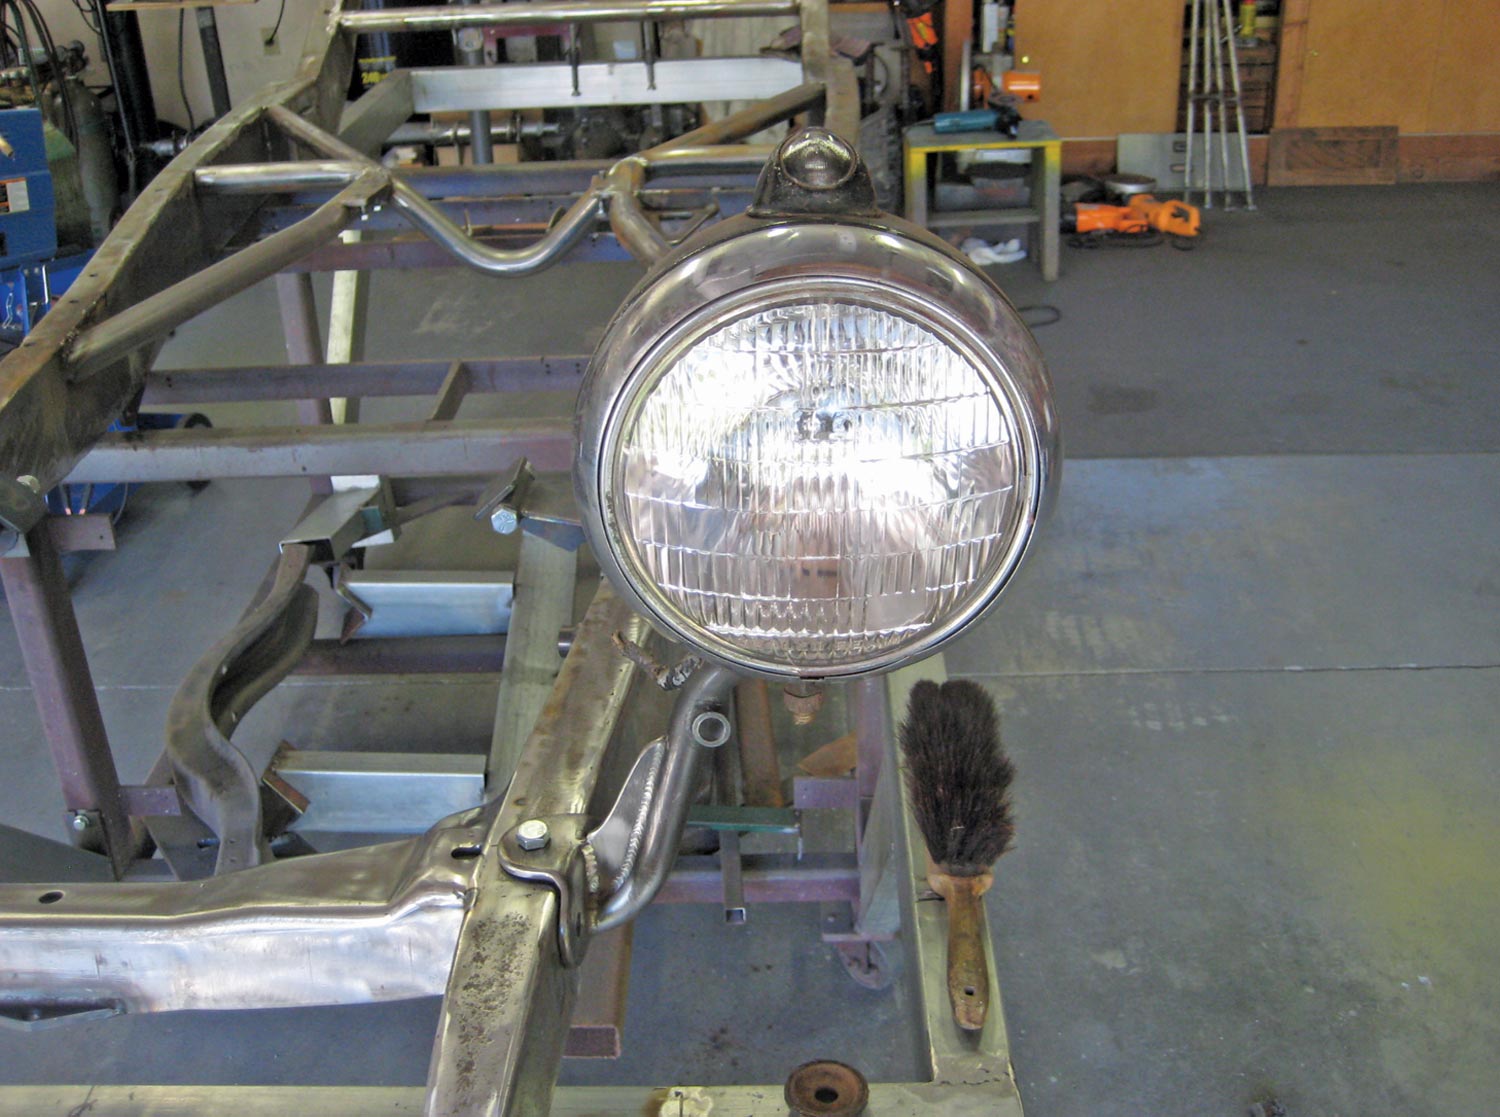 a now bolt-on headlight/shock absorber mount, bolted in place with a headlight